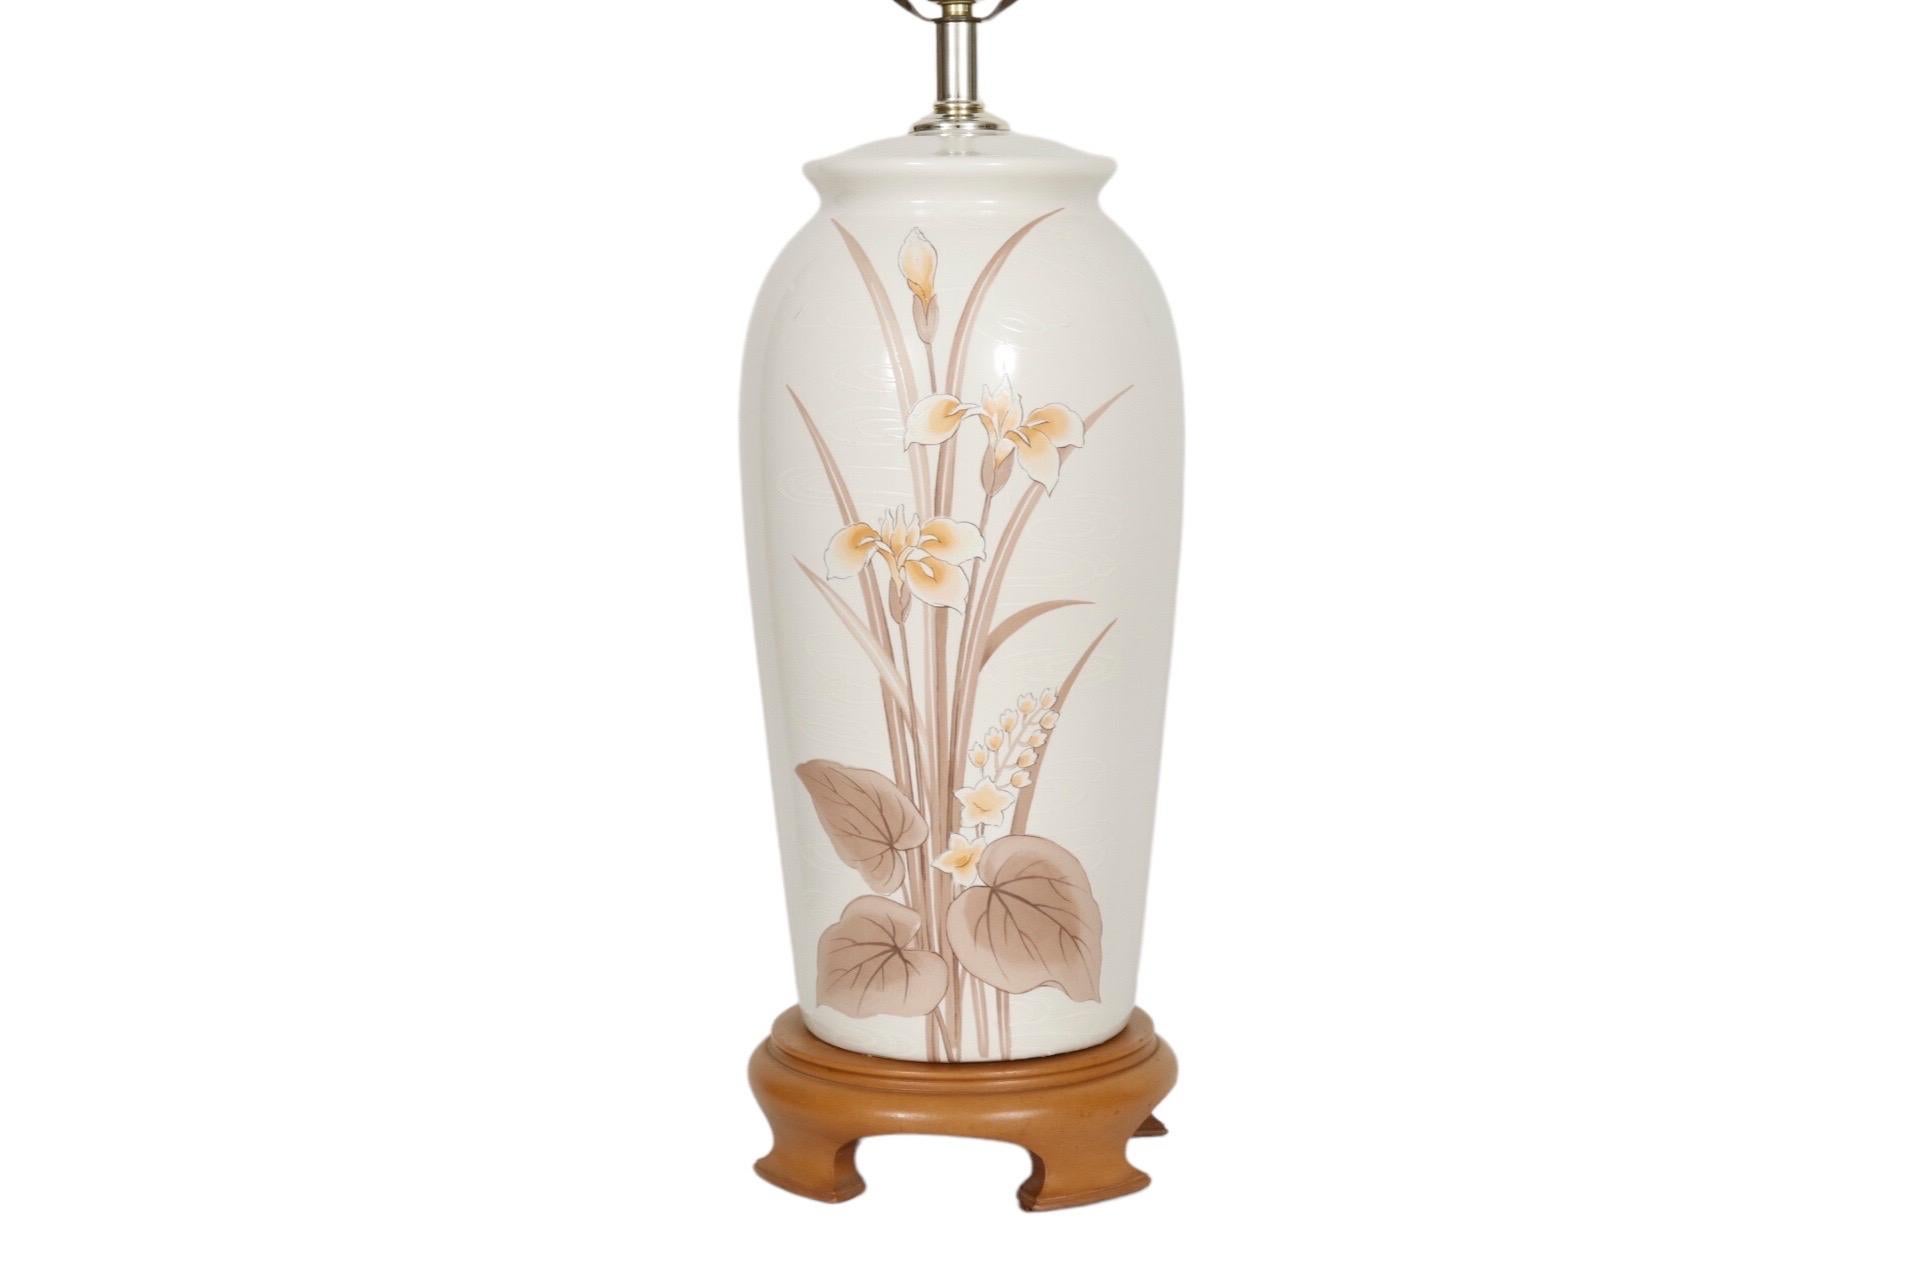 A Ming style ceramic table lamp in white. Decorated with hand painted iris and lily flowers with foliage in a golden brown color palette. Stands on a brown wooden base with four Ming style feet. Measures 23”H to the top of the socket, 33.25”H to the